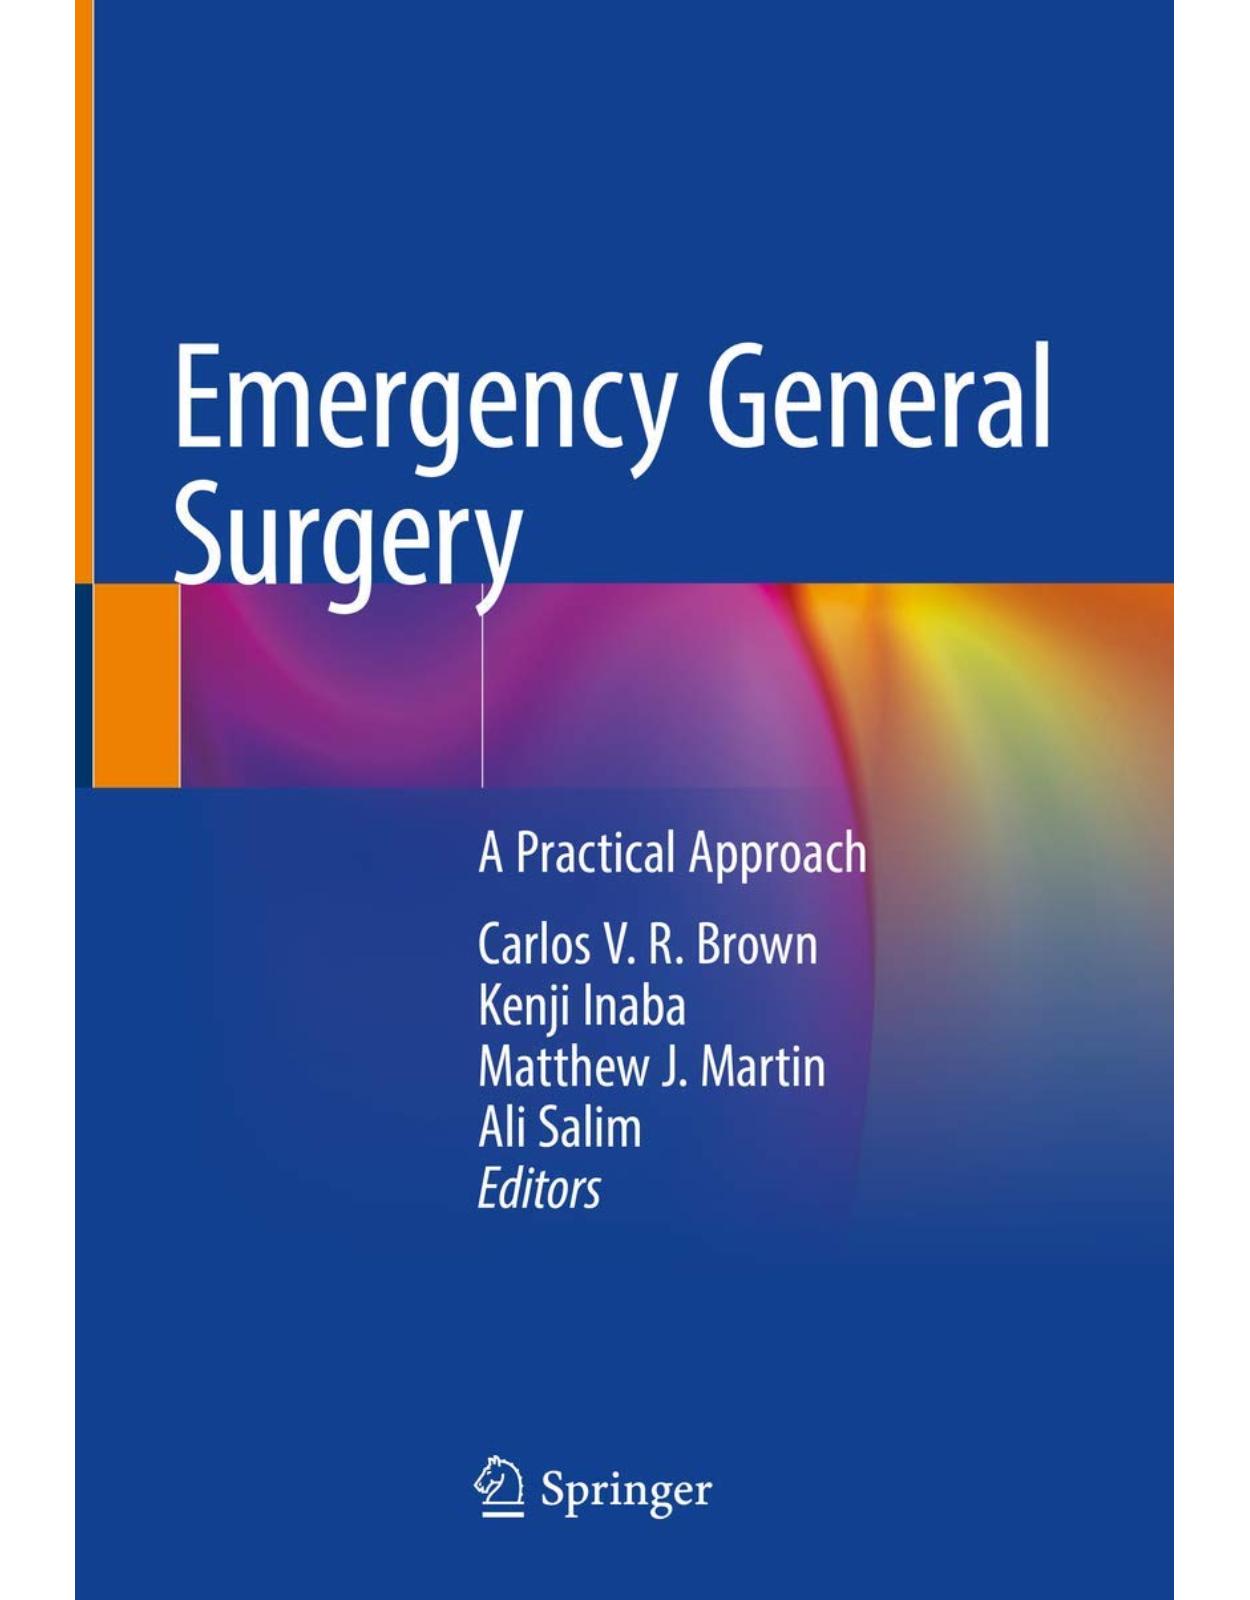 Emergency General Surgery: A Practical Approach